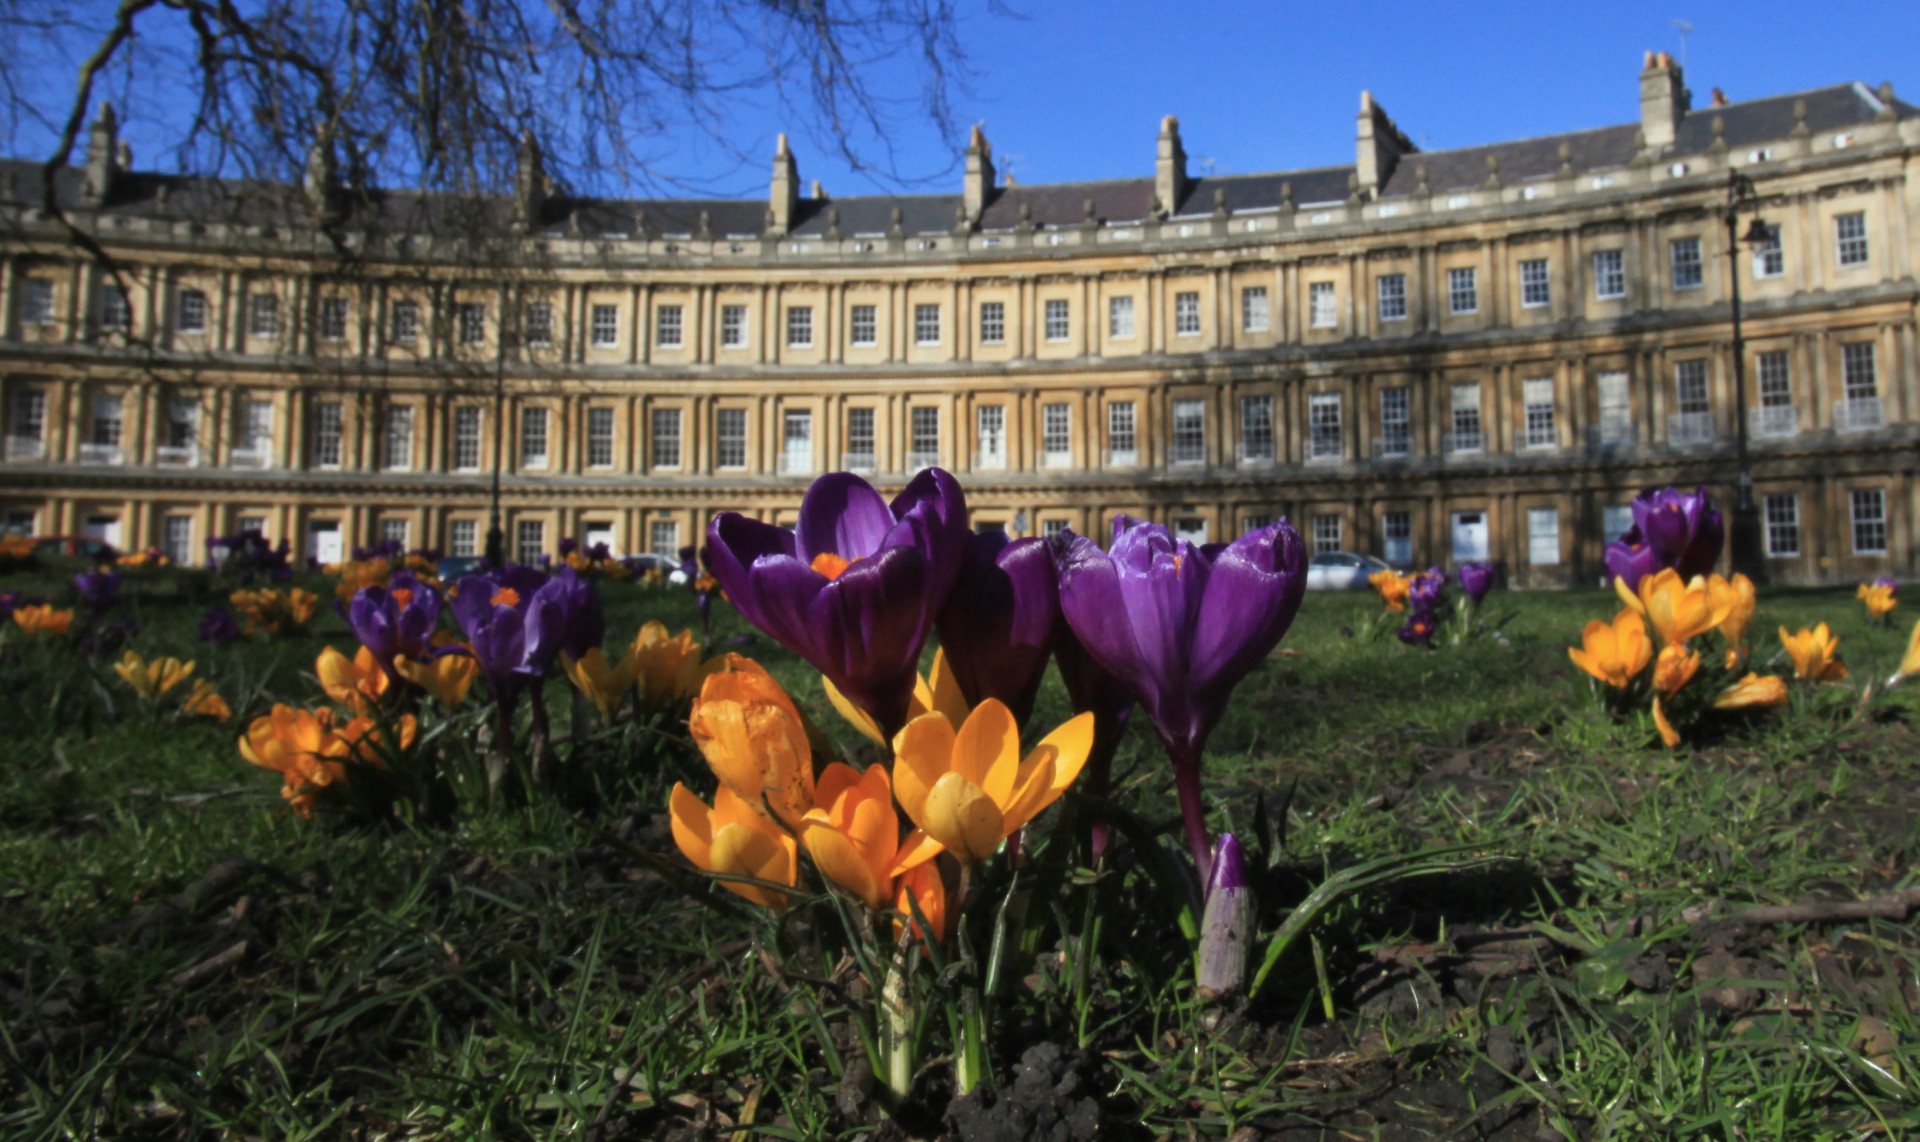 Fans of crocus flowers can see them in bloom outside the Circus in Bath.<p>You may also like:<a href="https://www.starsinsider.com/n/494084?utm_source=msn.com&utm_medium=display&utm_campaign=referral_description&utm_content=344596v2en-us"> The most absurd female deaths in literature</a></p>